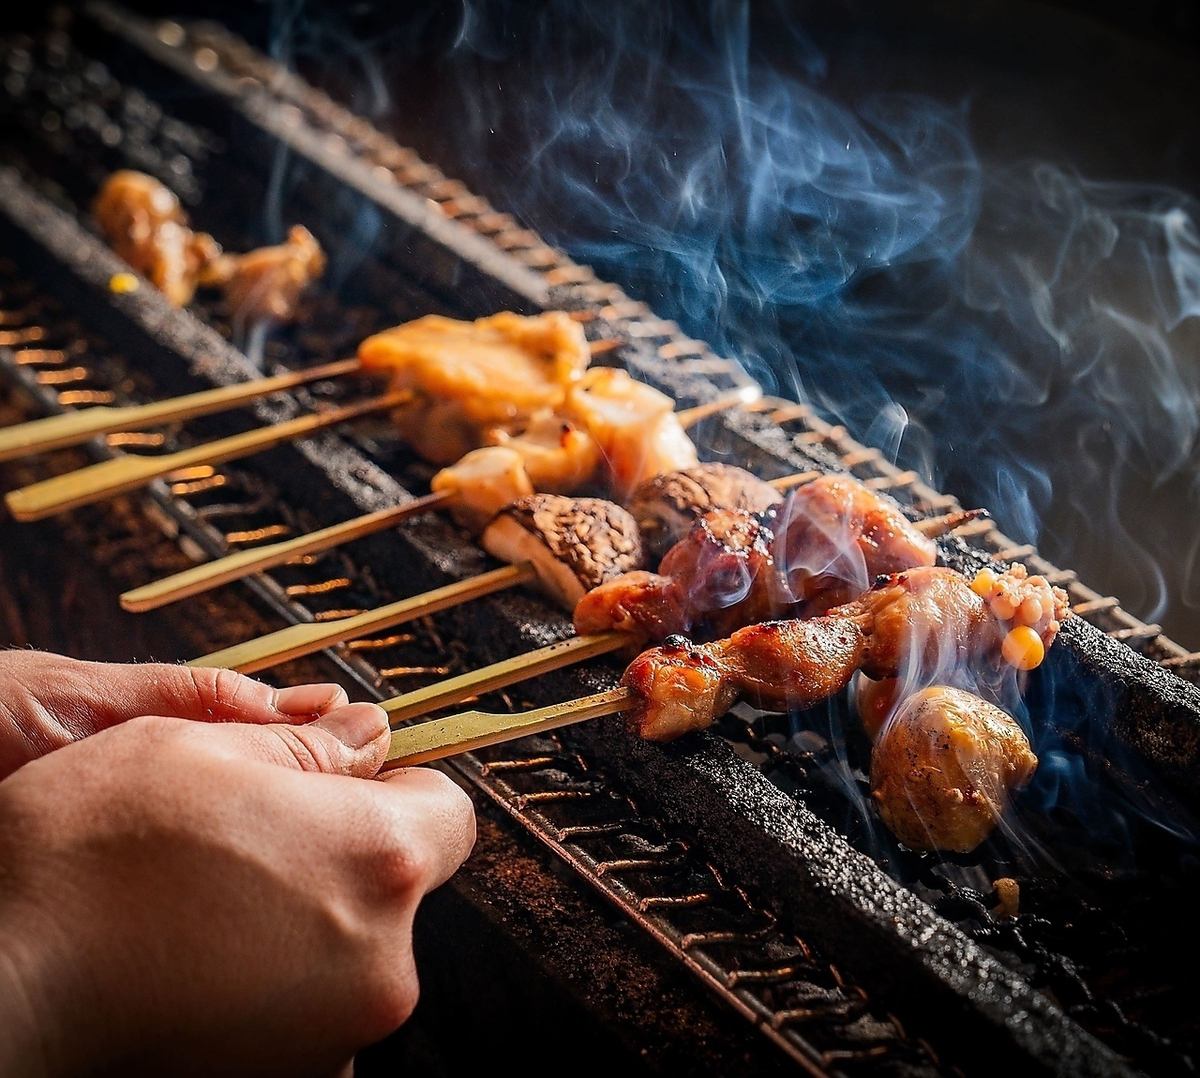 Charcoal grilled yakitori prepared by a professional.It's sure to be a blissful treat!